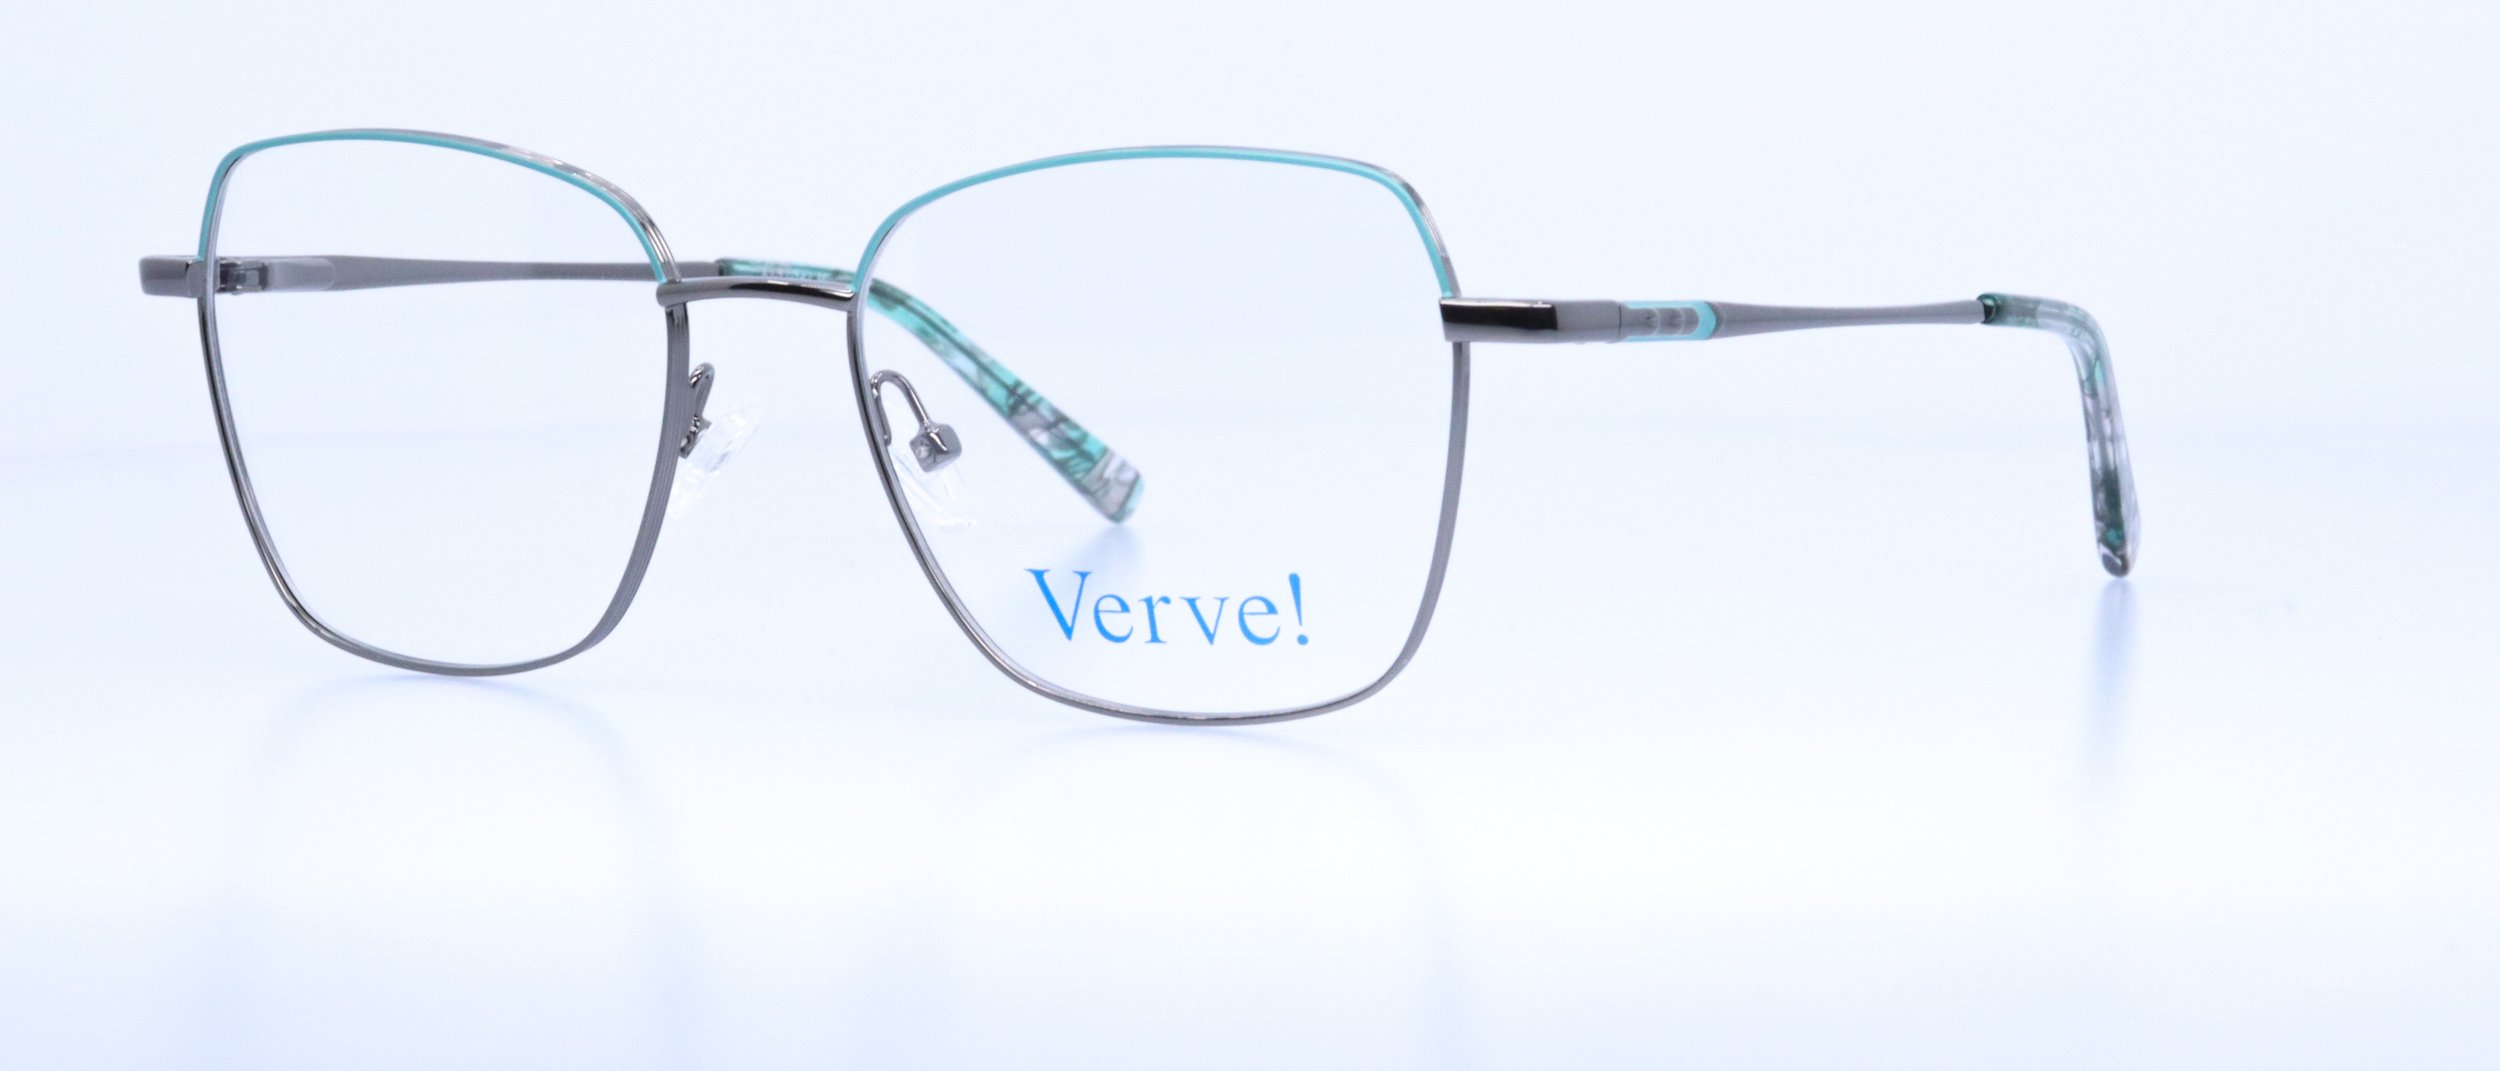  NEW!! Ravel: 52-17-142, Available in Lilac/Silver or Mint/Gunmetal 